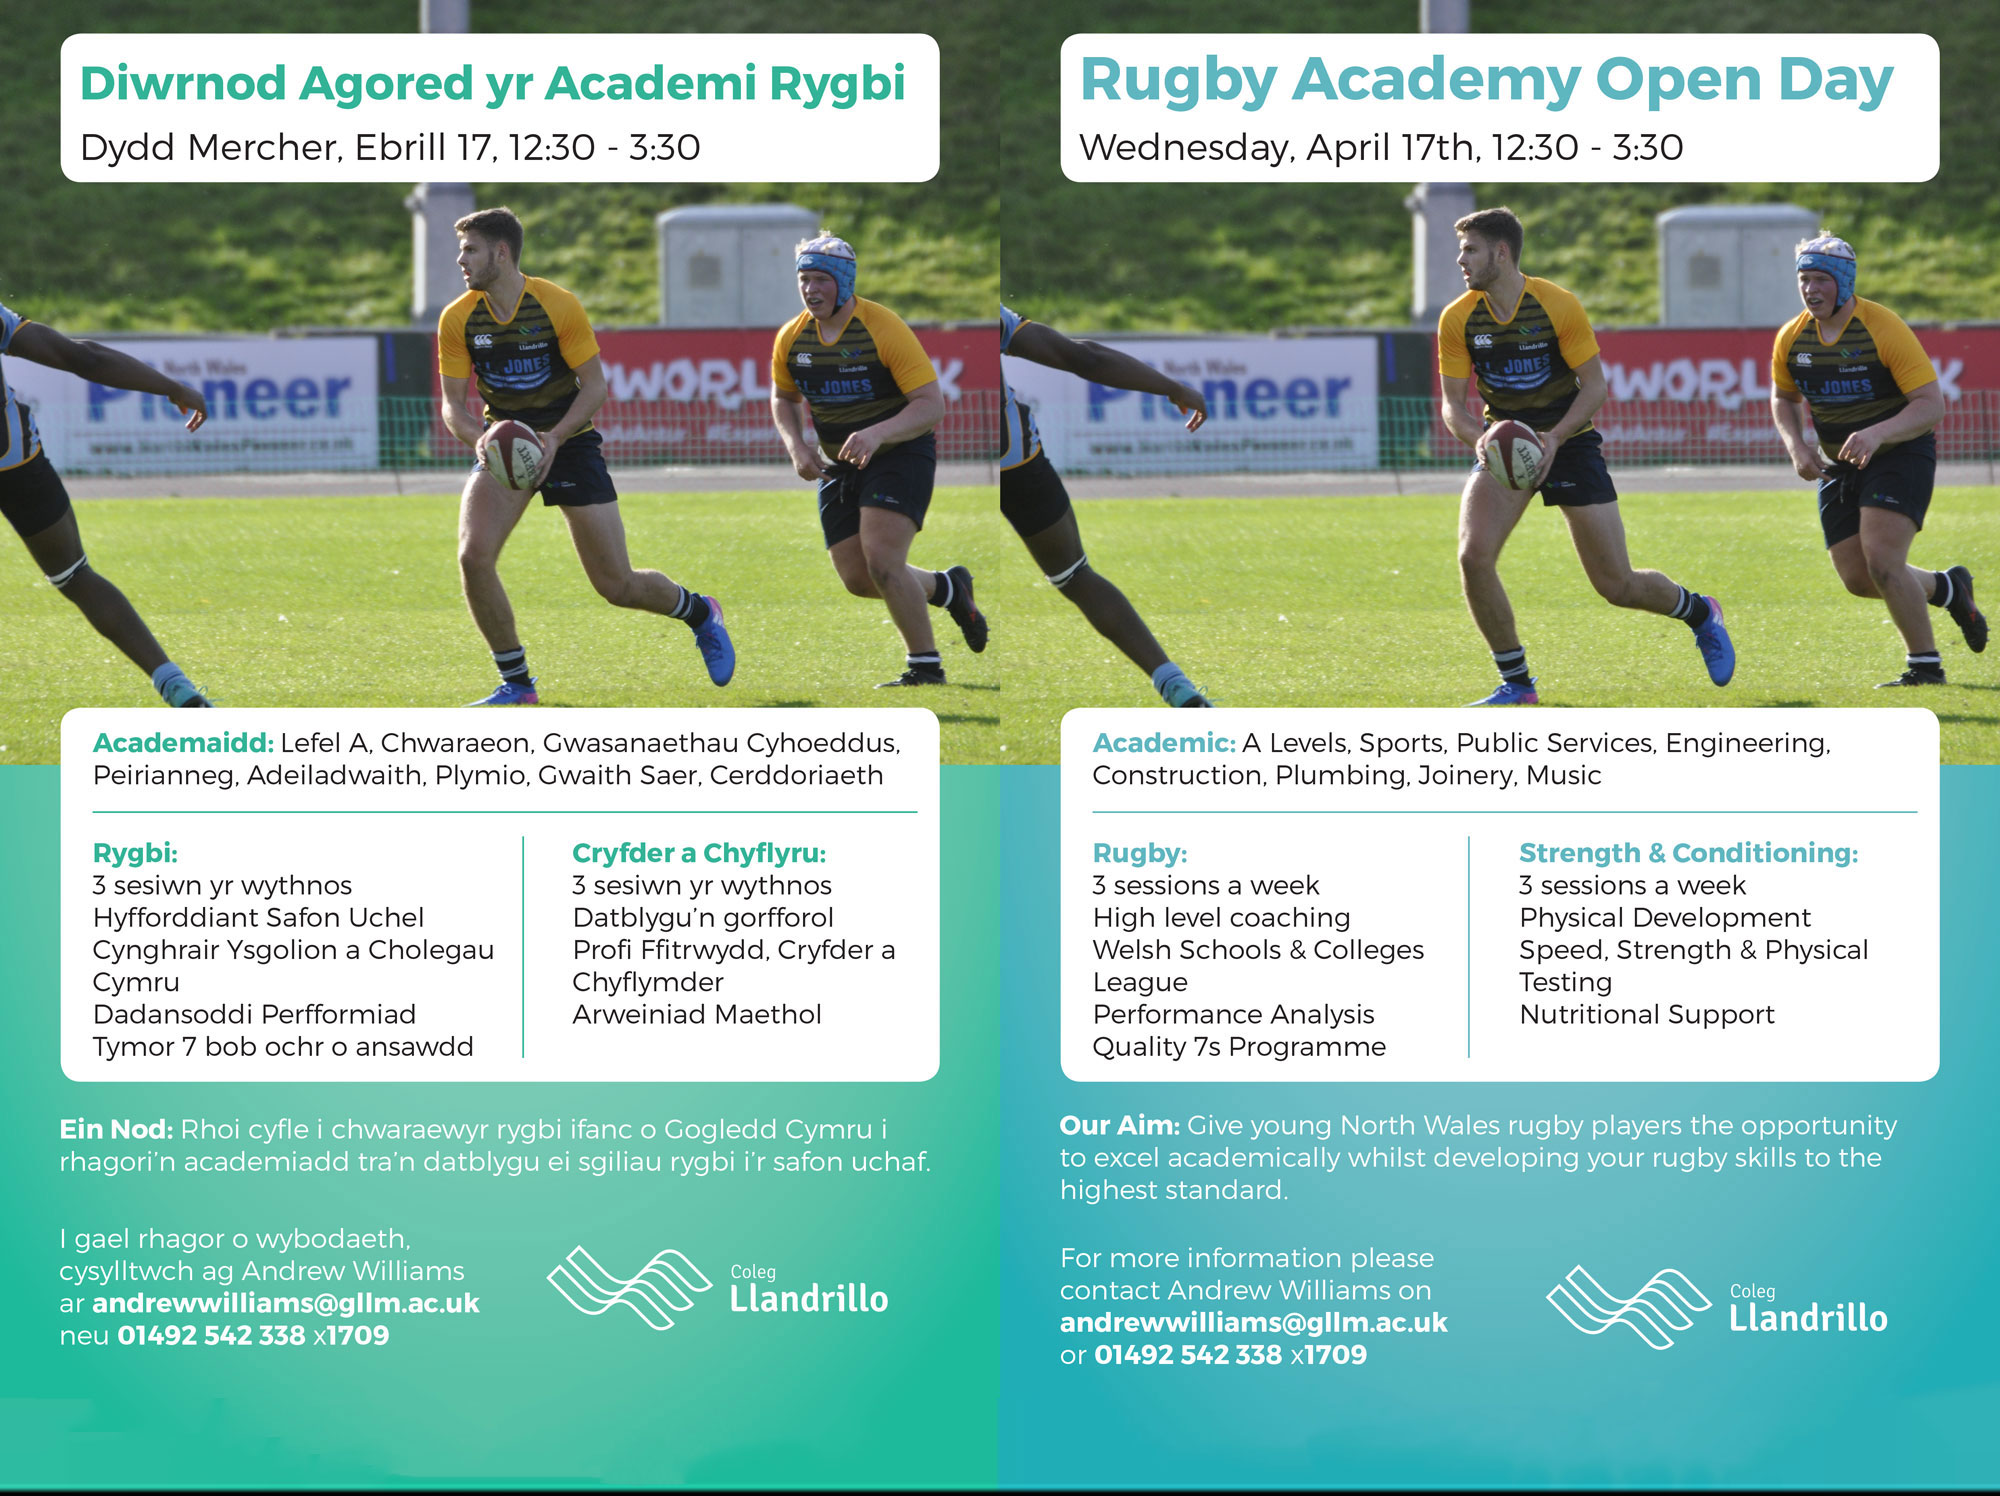 Rugby Academy Open Day